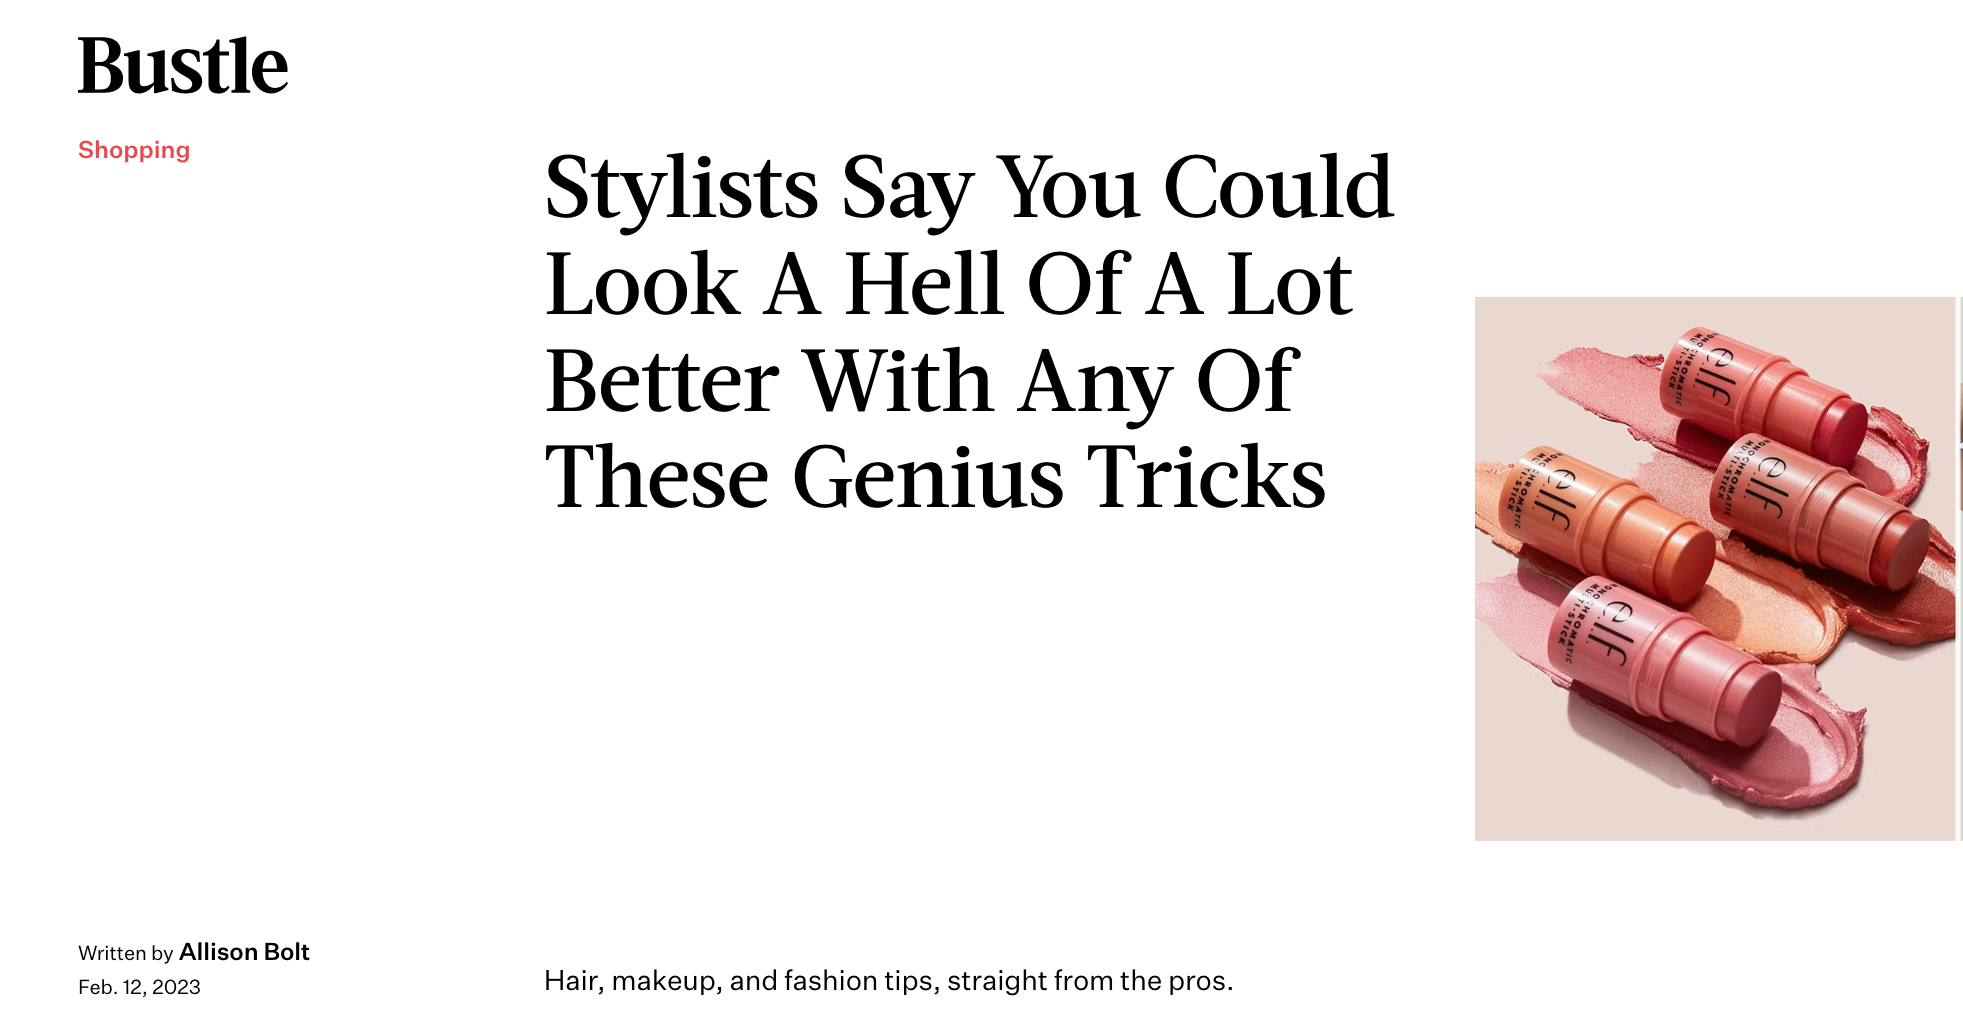 BUSTLE: Stylists Say You Could Look A Hell Of A Lot Better With Any Of These Genius Tricks